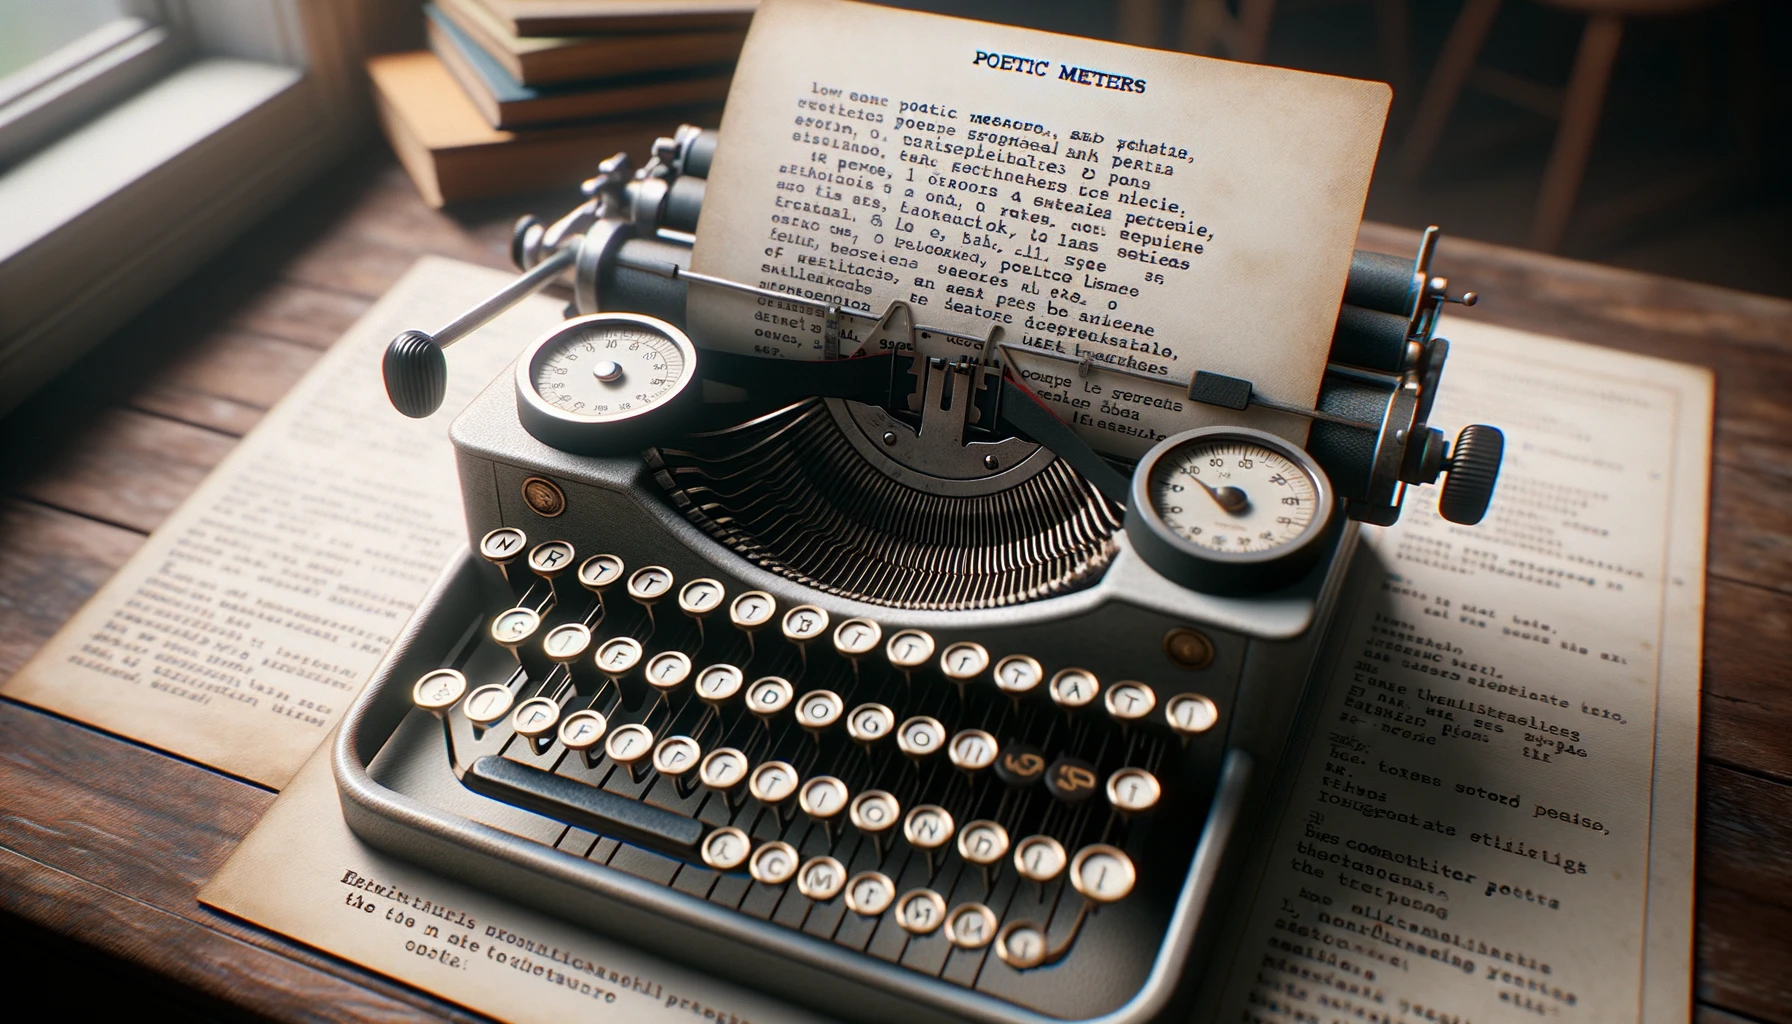 A close-up of a vintage typewriter in a cozy room. The paper in the typewriter has lines written in different poetic meters, each labeled and emphasized. Beside the typewriter, annotated notes provide insights into the study of poetic meters.